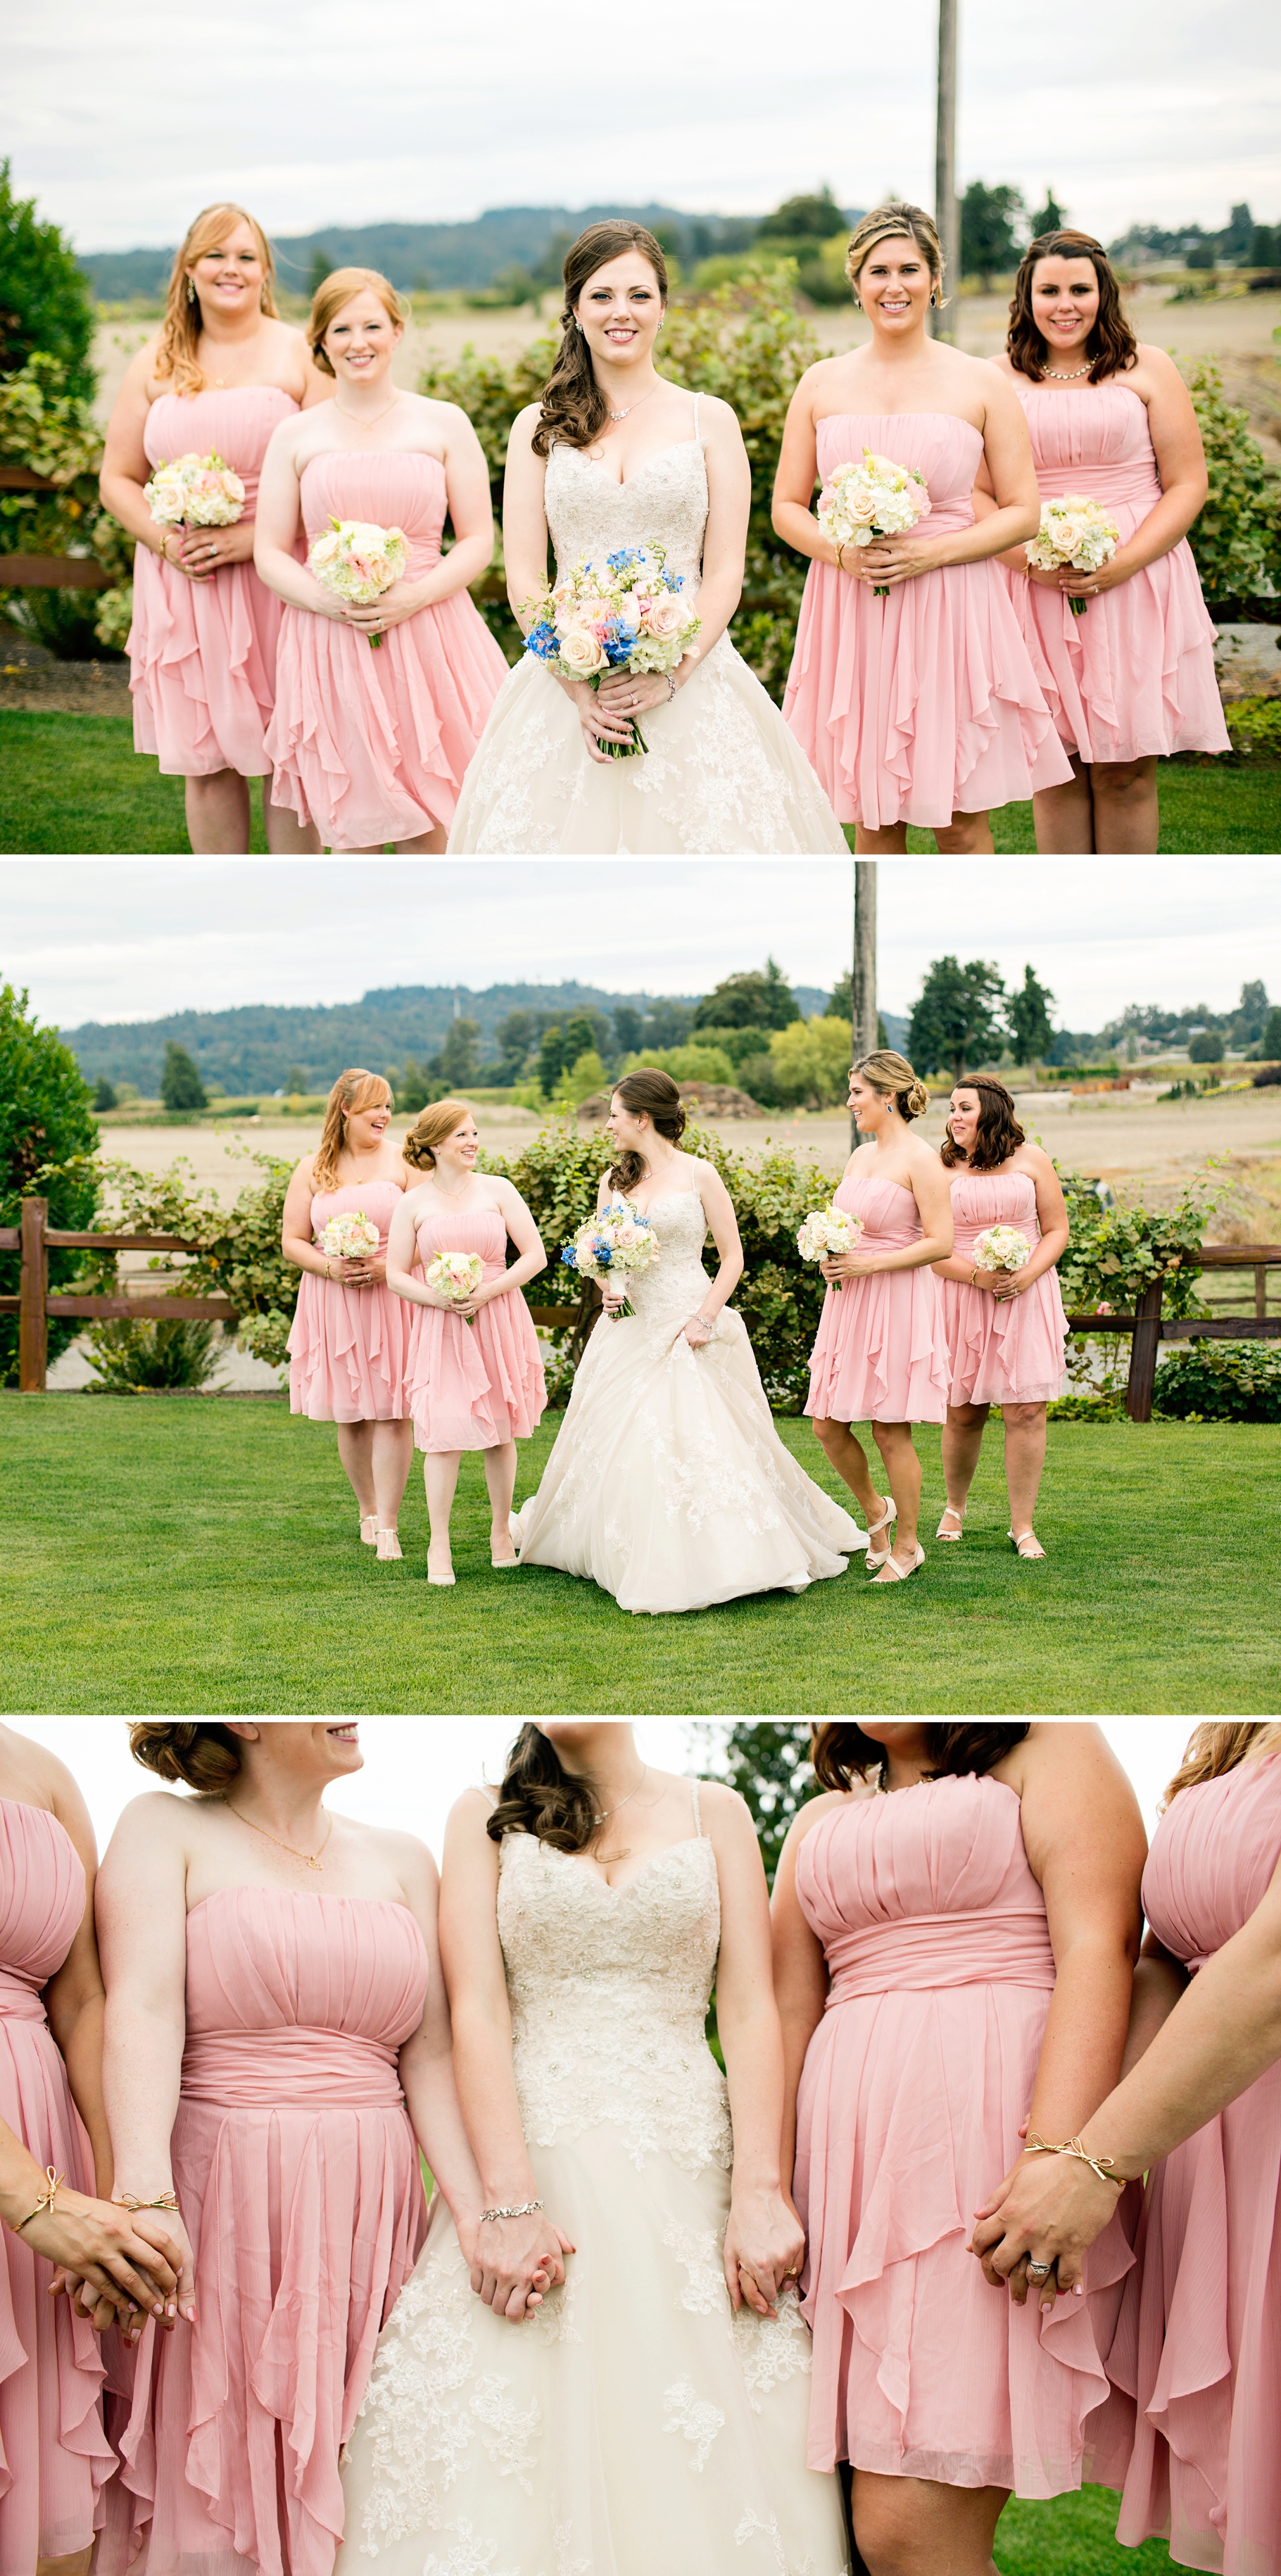 20-Bridesmaids-Bridal-Party-Portraits-Pink-Gowns-Dresses-Gold-Hidden-Meadows-Snohomish-Wedding-Photographer-Northwest-Seattle-Photography-by-Betty-Elaine